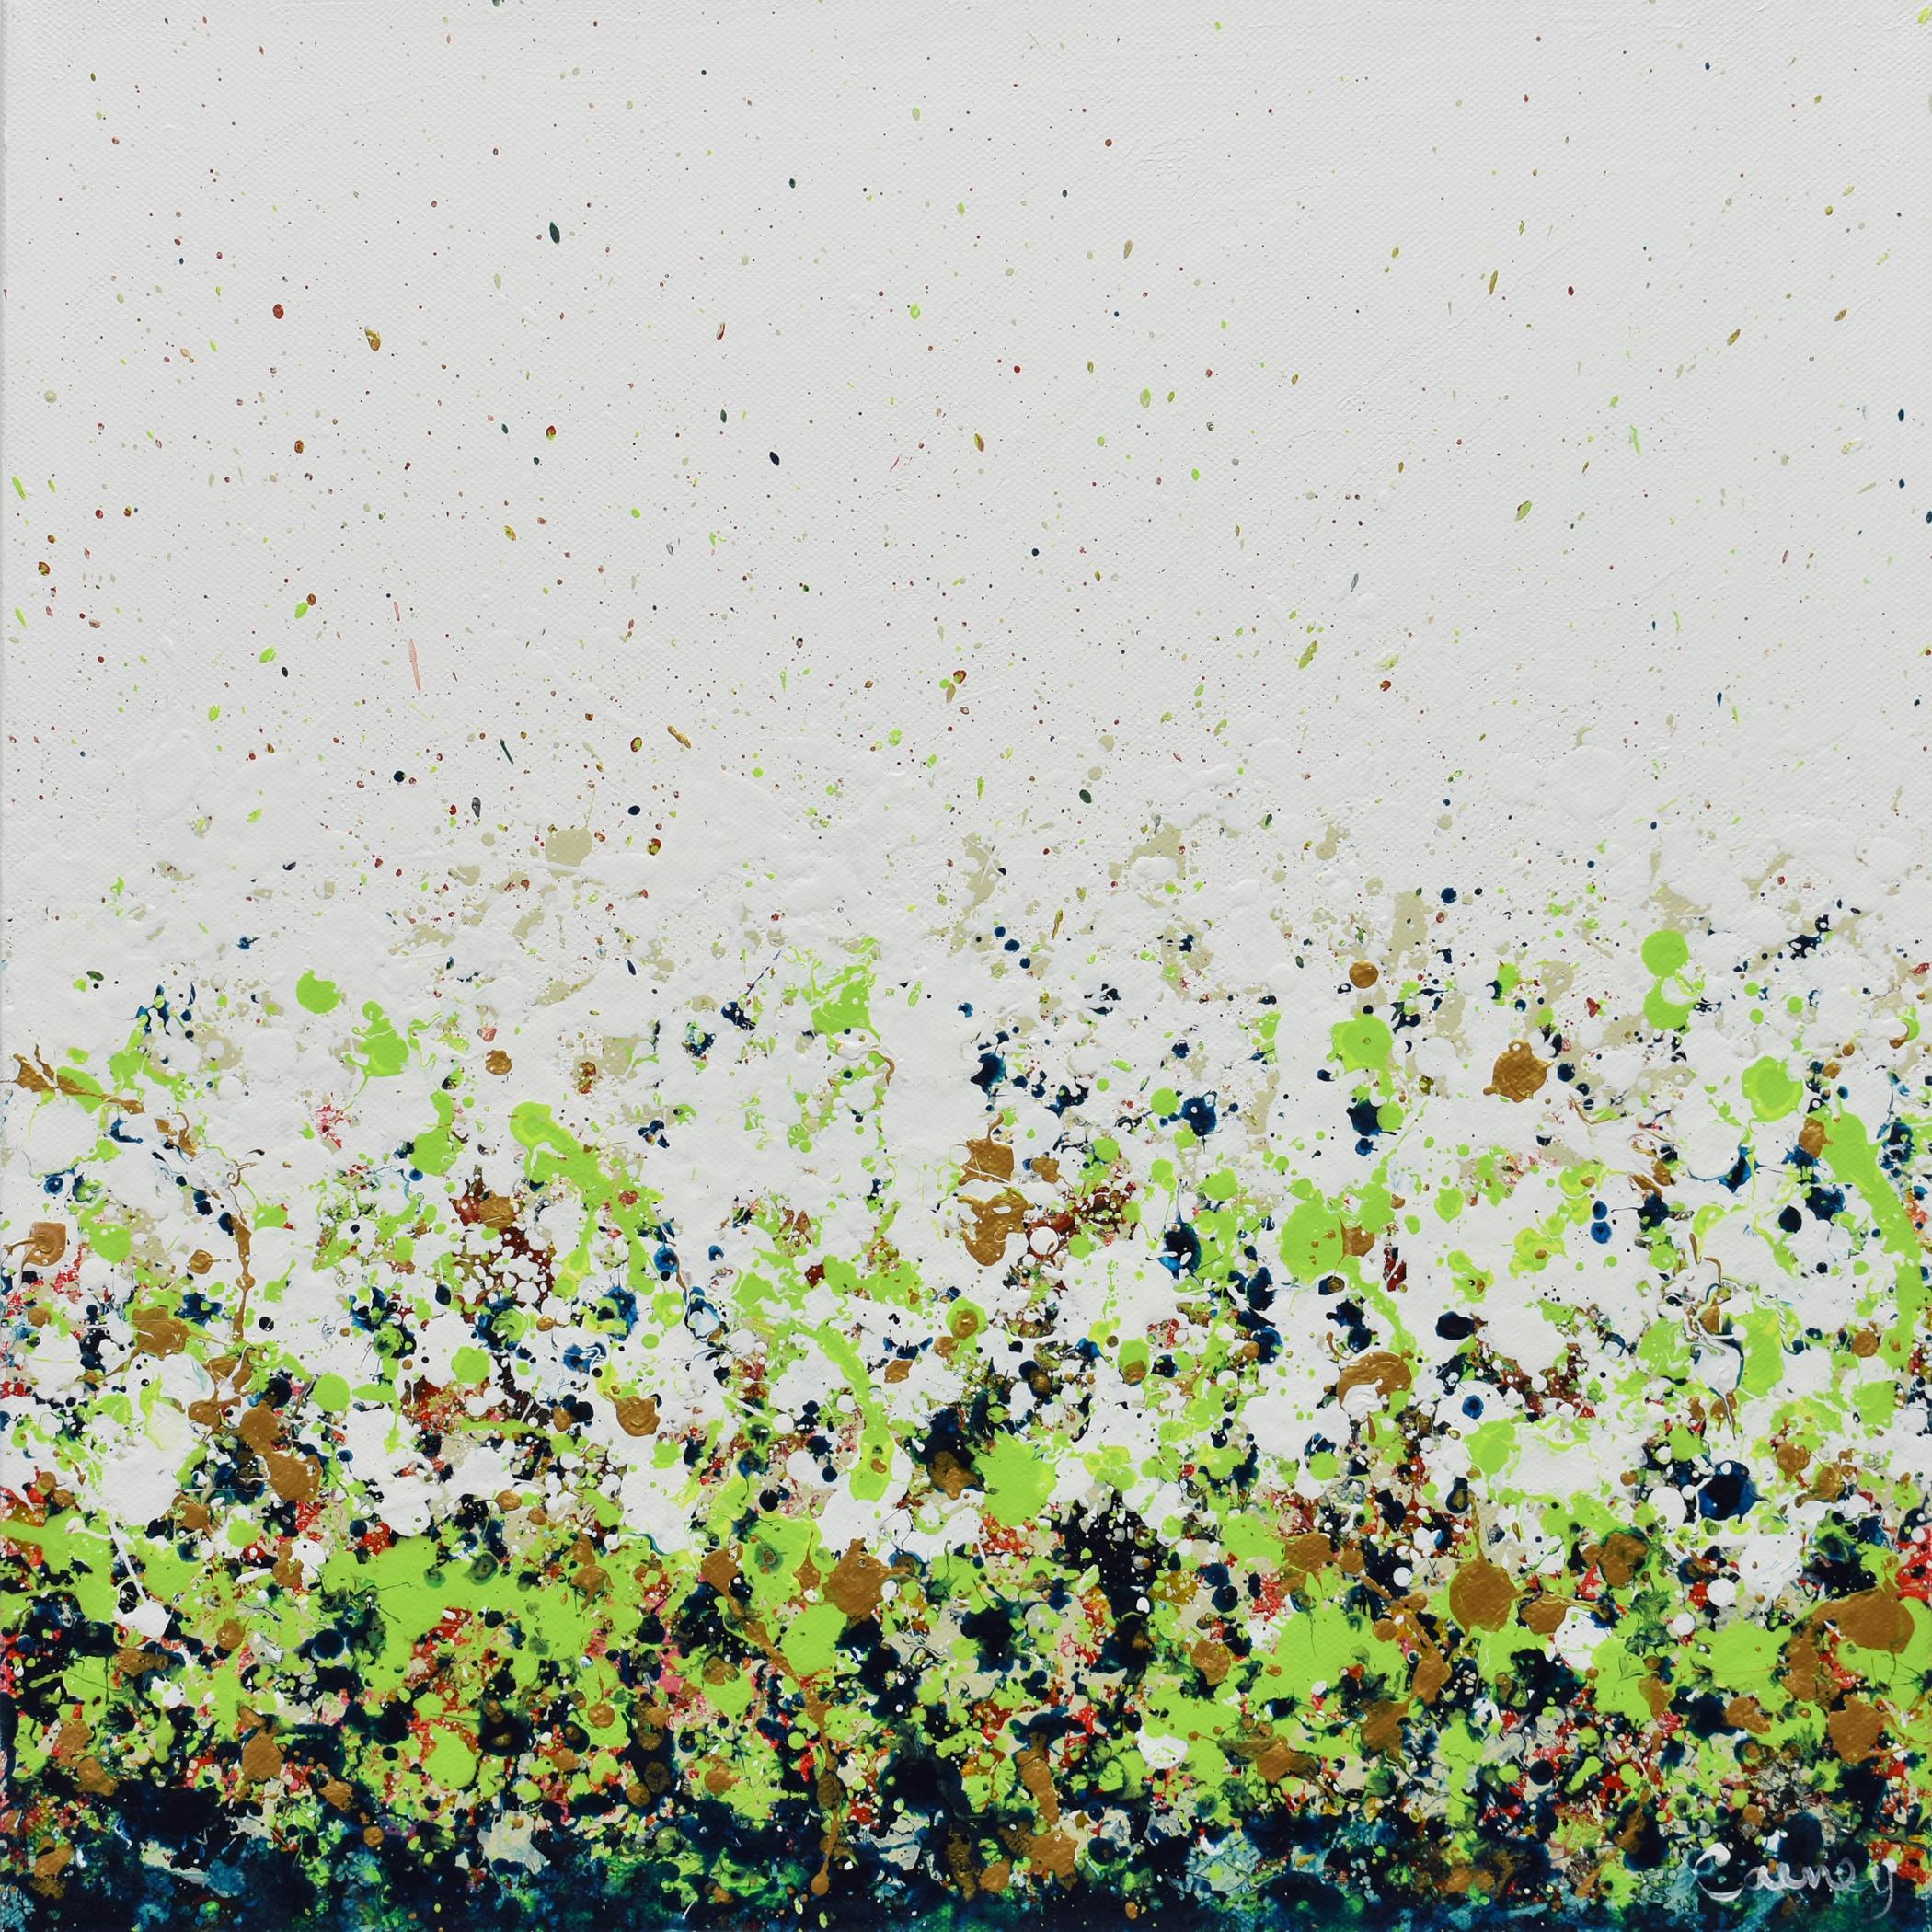 <p>Artist Comments<br />A fresh palette of green, red, navy and metallic gold splash across the canvas in suggestion of spring grasses. Part of Lisa Carney's signature GeoFlora series, a collection of abstracted botanical paintings where she uses